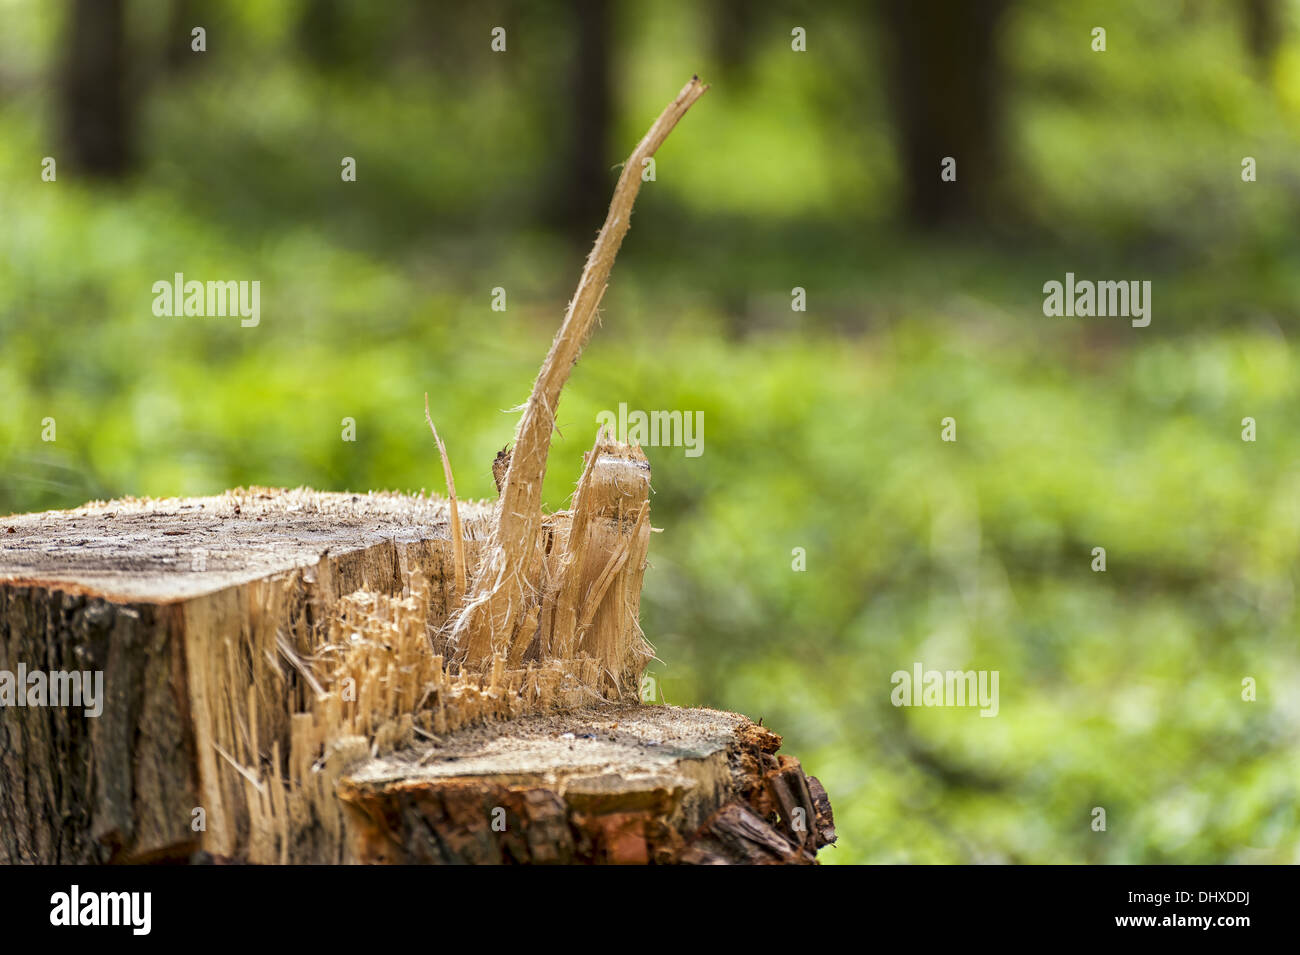 Tree stump with cut surfaces Stock Photo